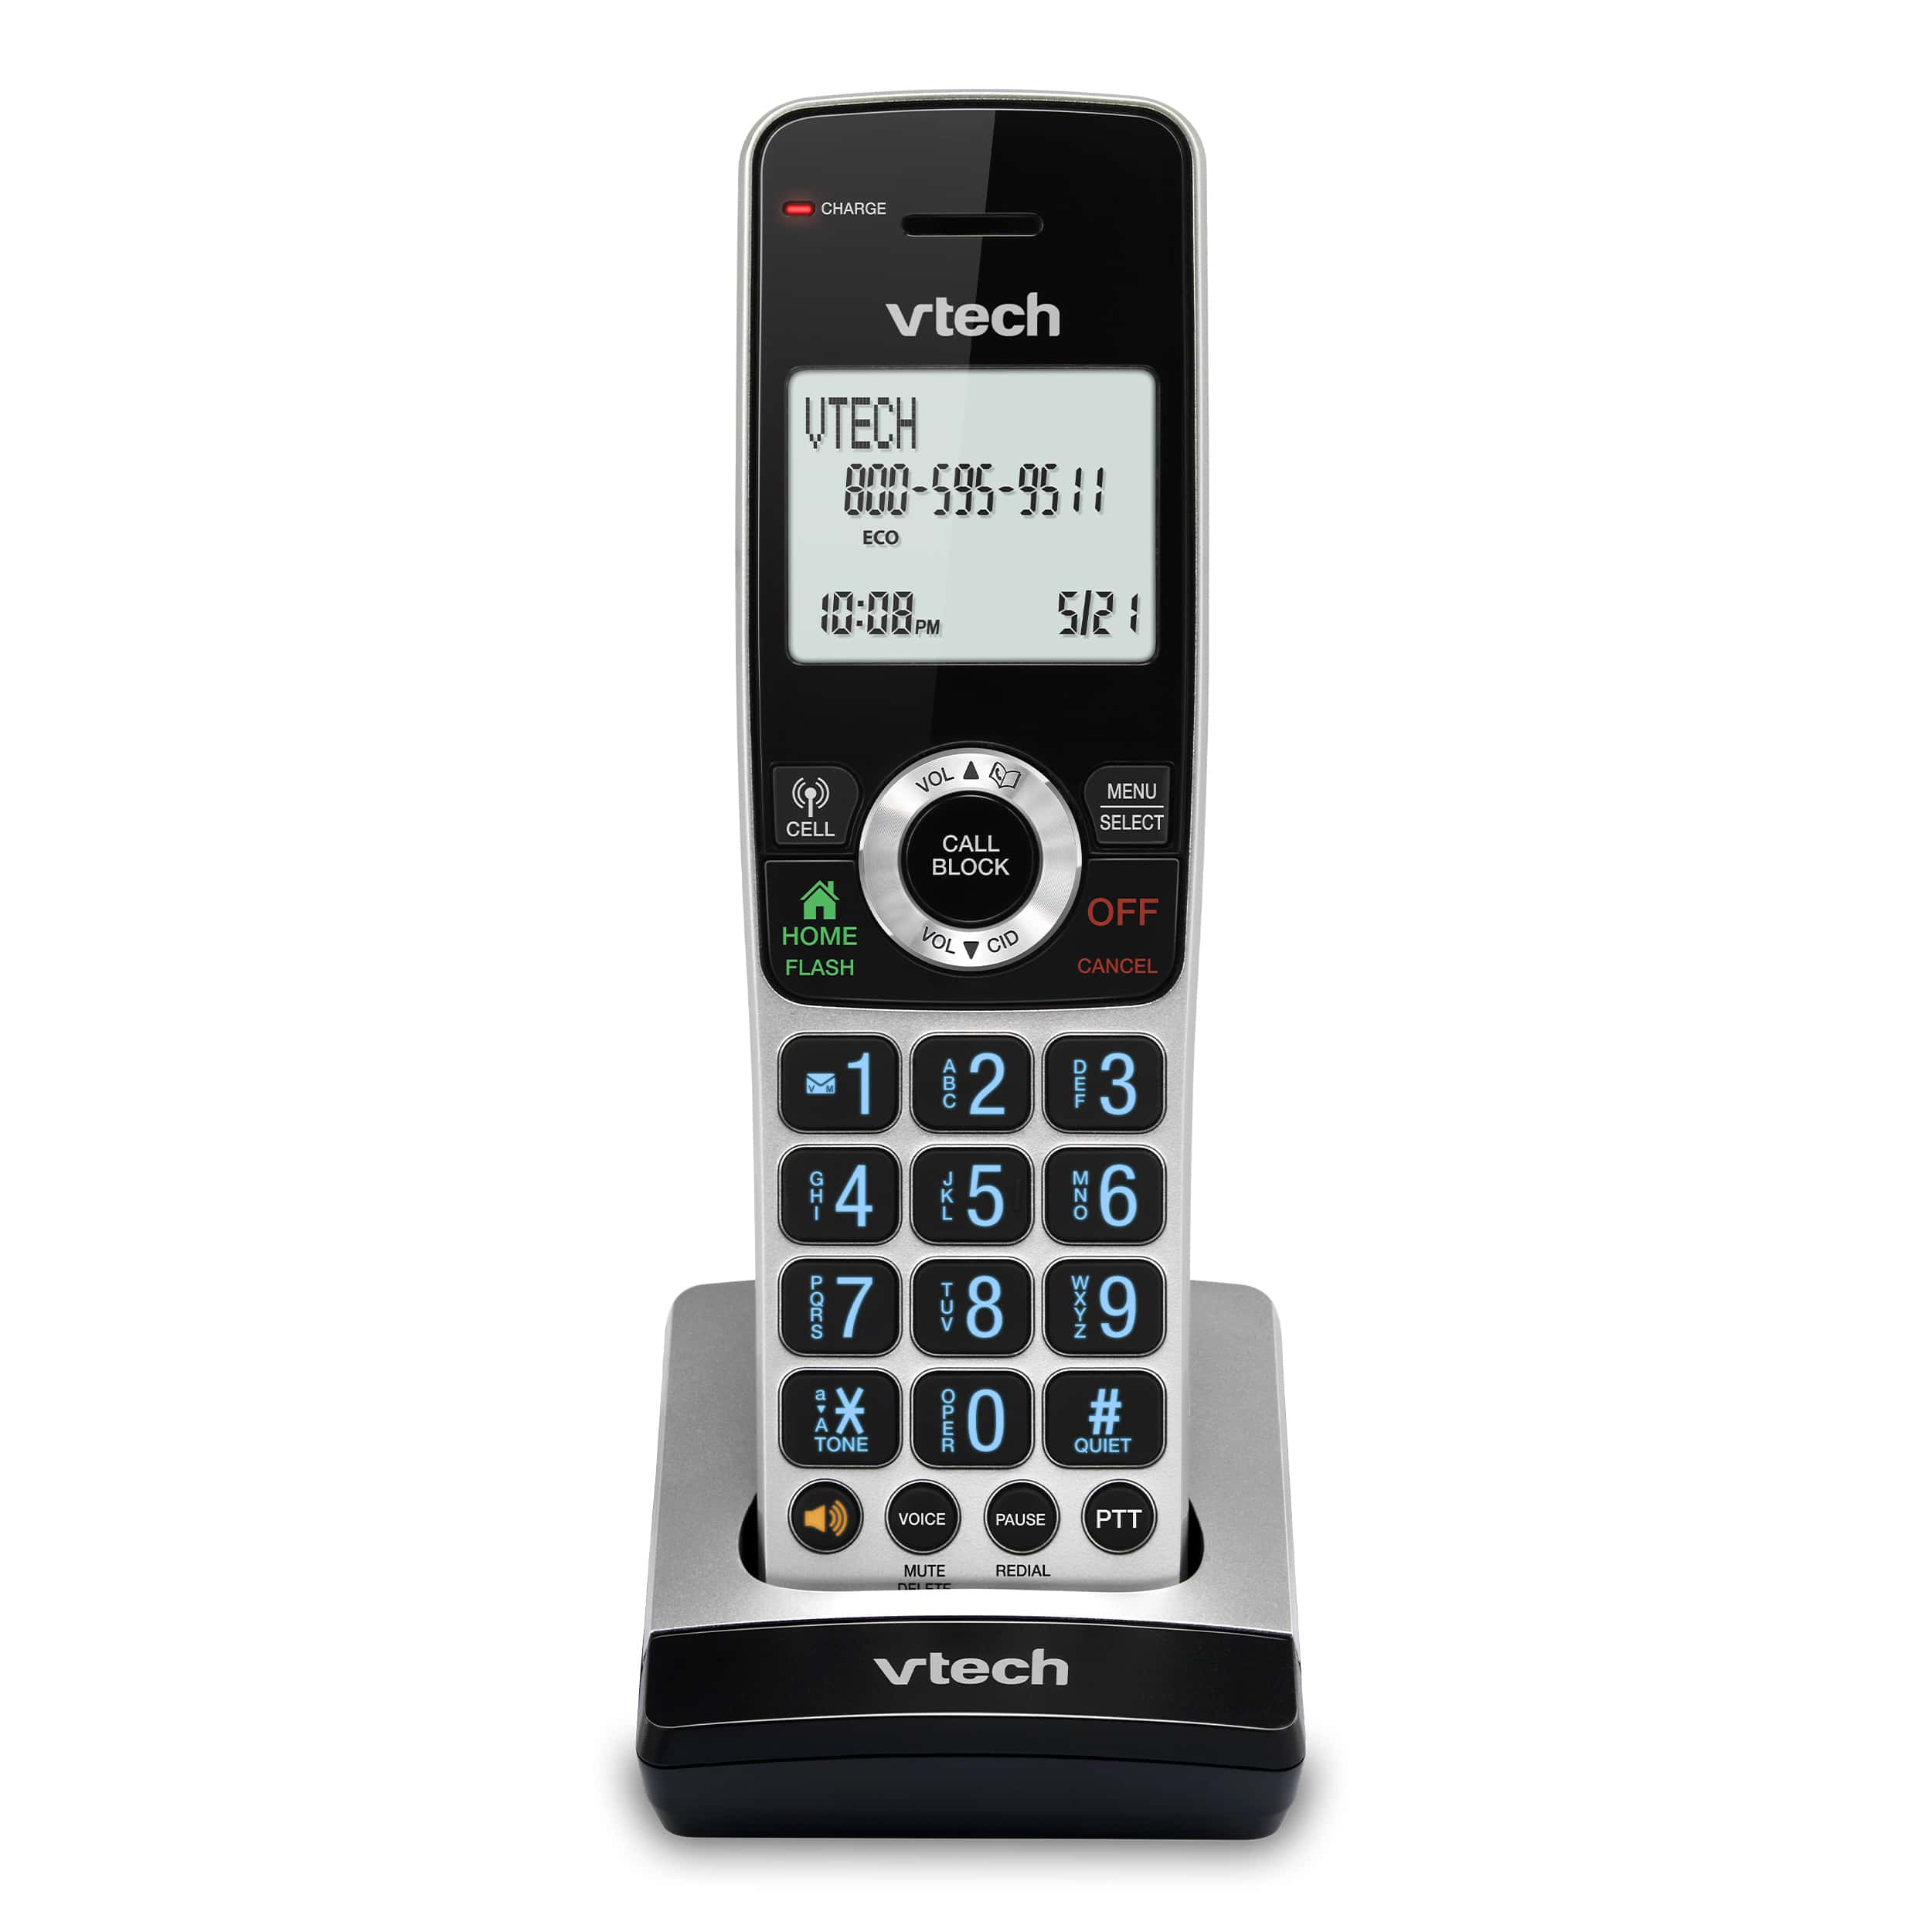 Accessory Handset with Bluetooth Connect to Cell and Smart Call Blocker